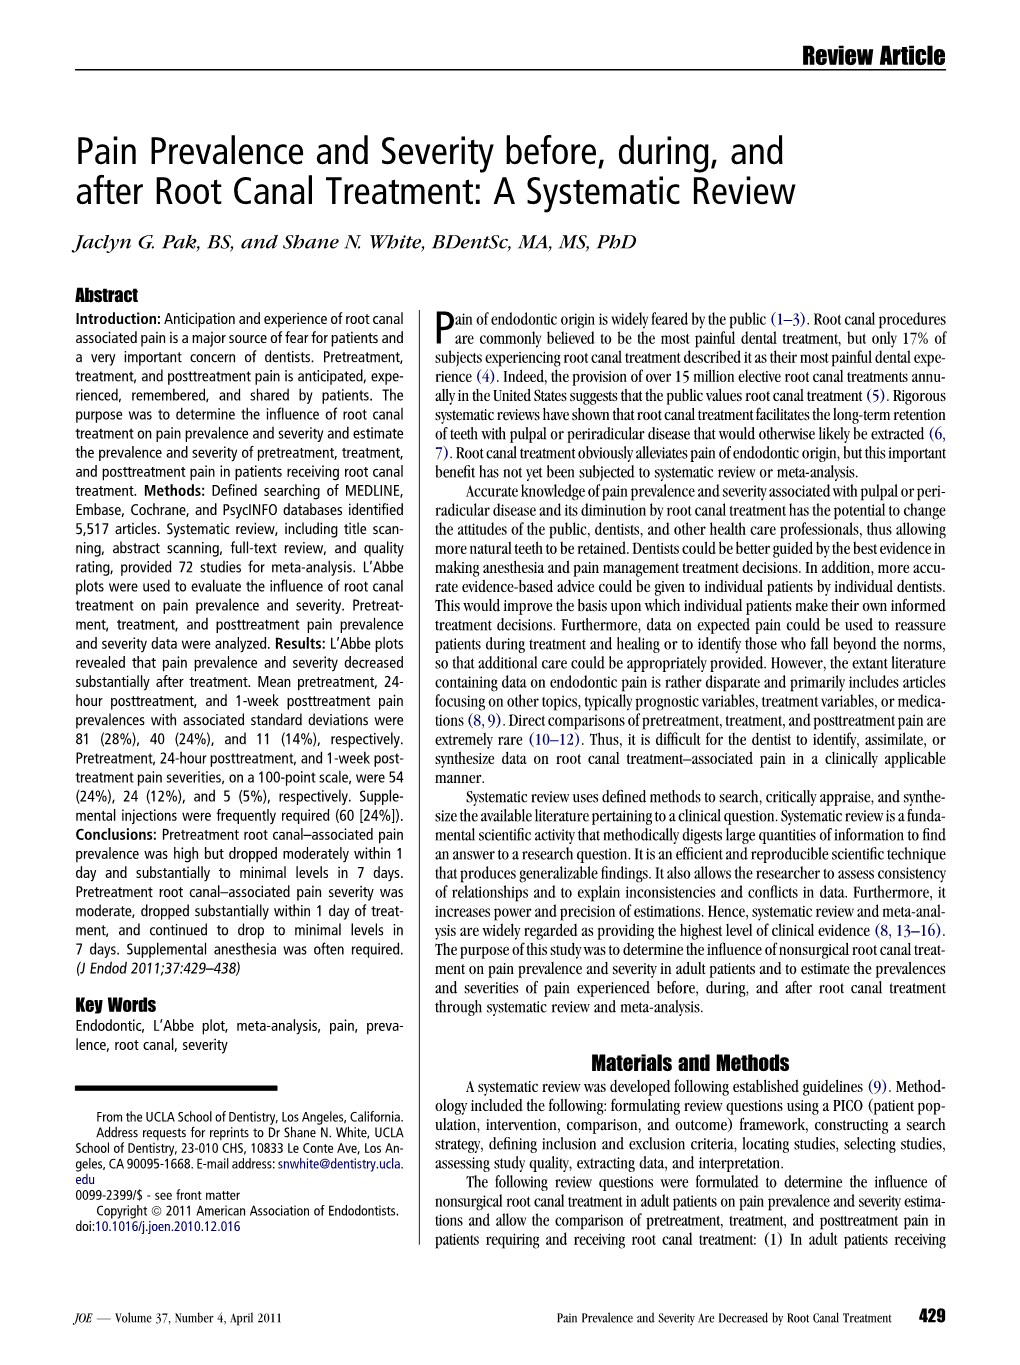 Pain Prevalence and Severity Before, During, and After Root Canal Treatment: a Systematic Review Jaclyn G